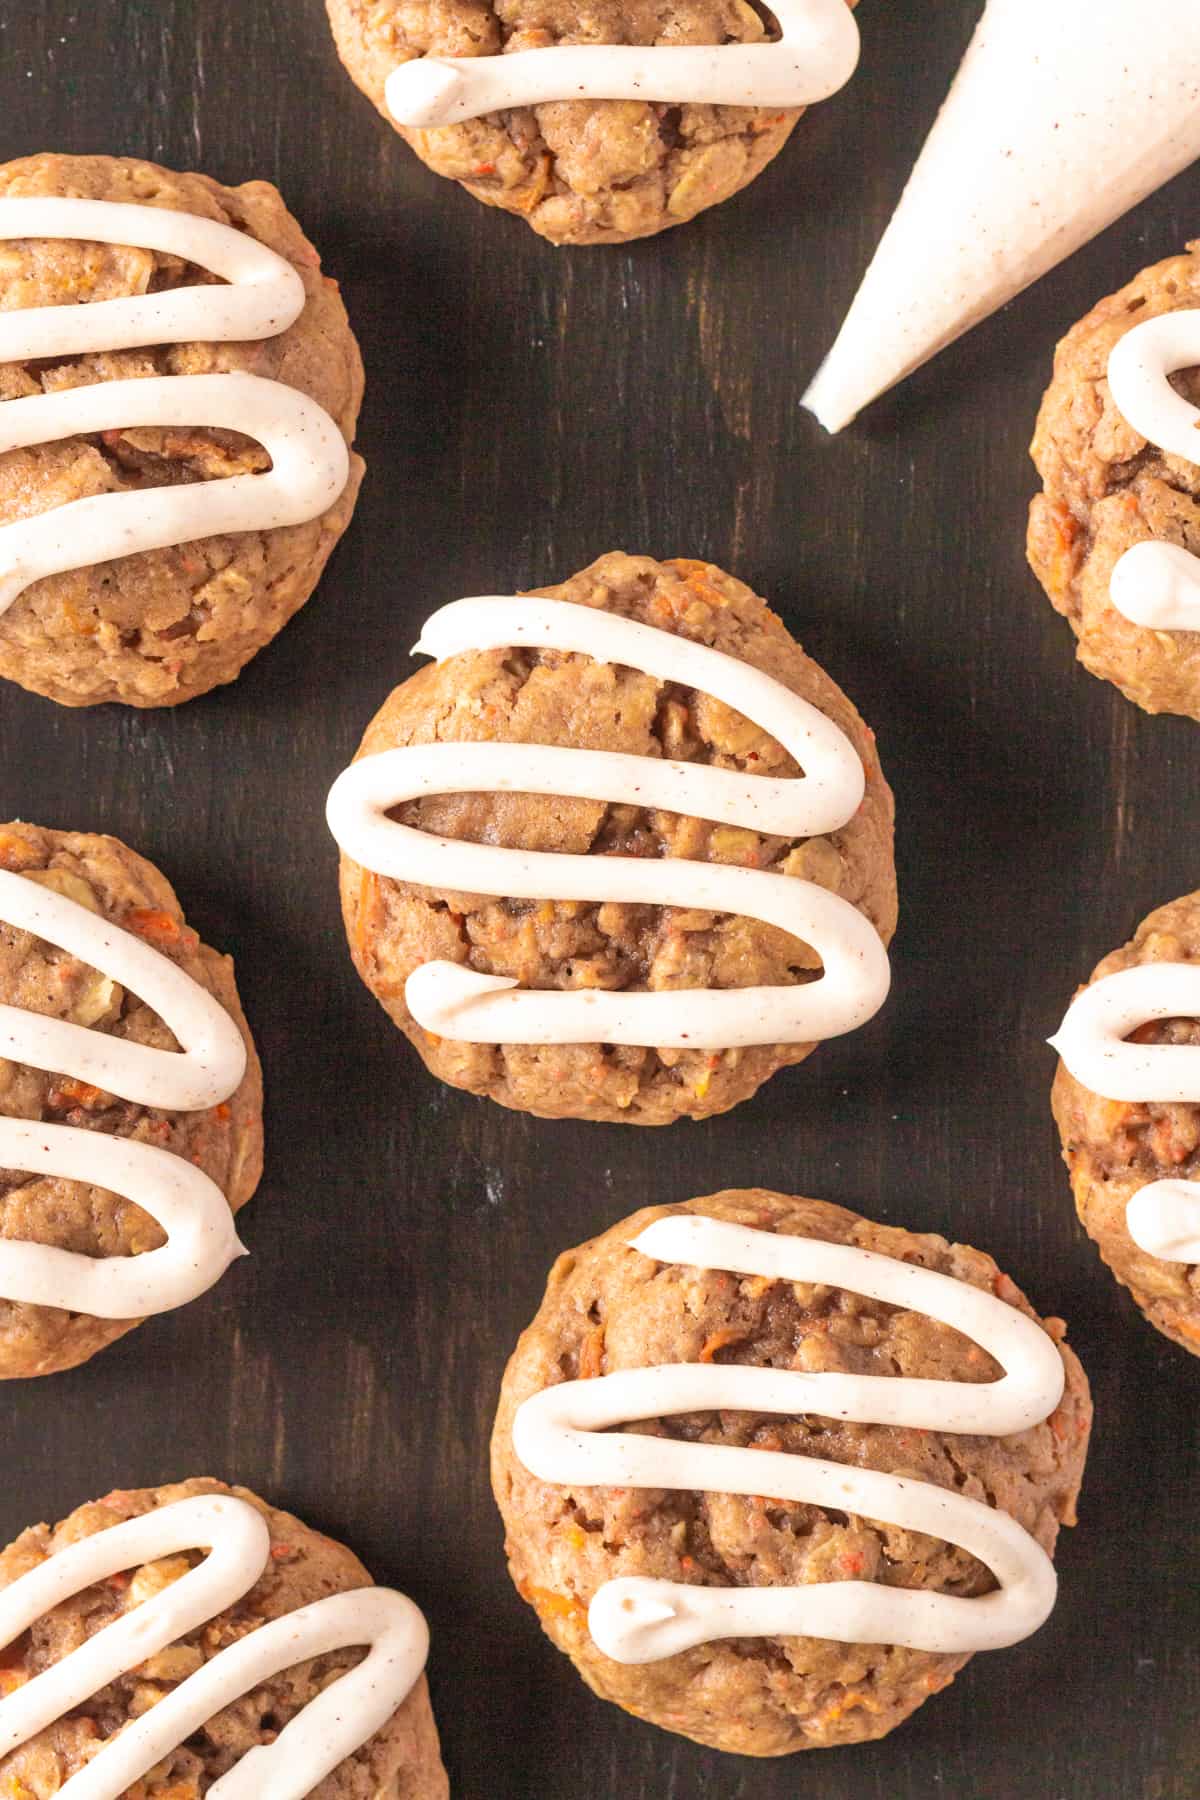 Carrot cake mix cookies with frosting piped on top and piping bag next to them.